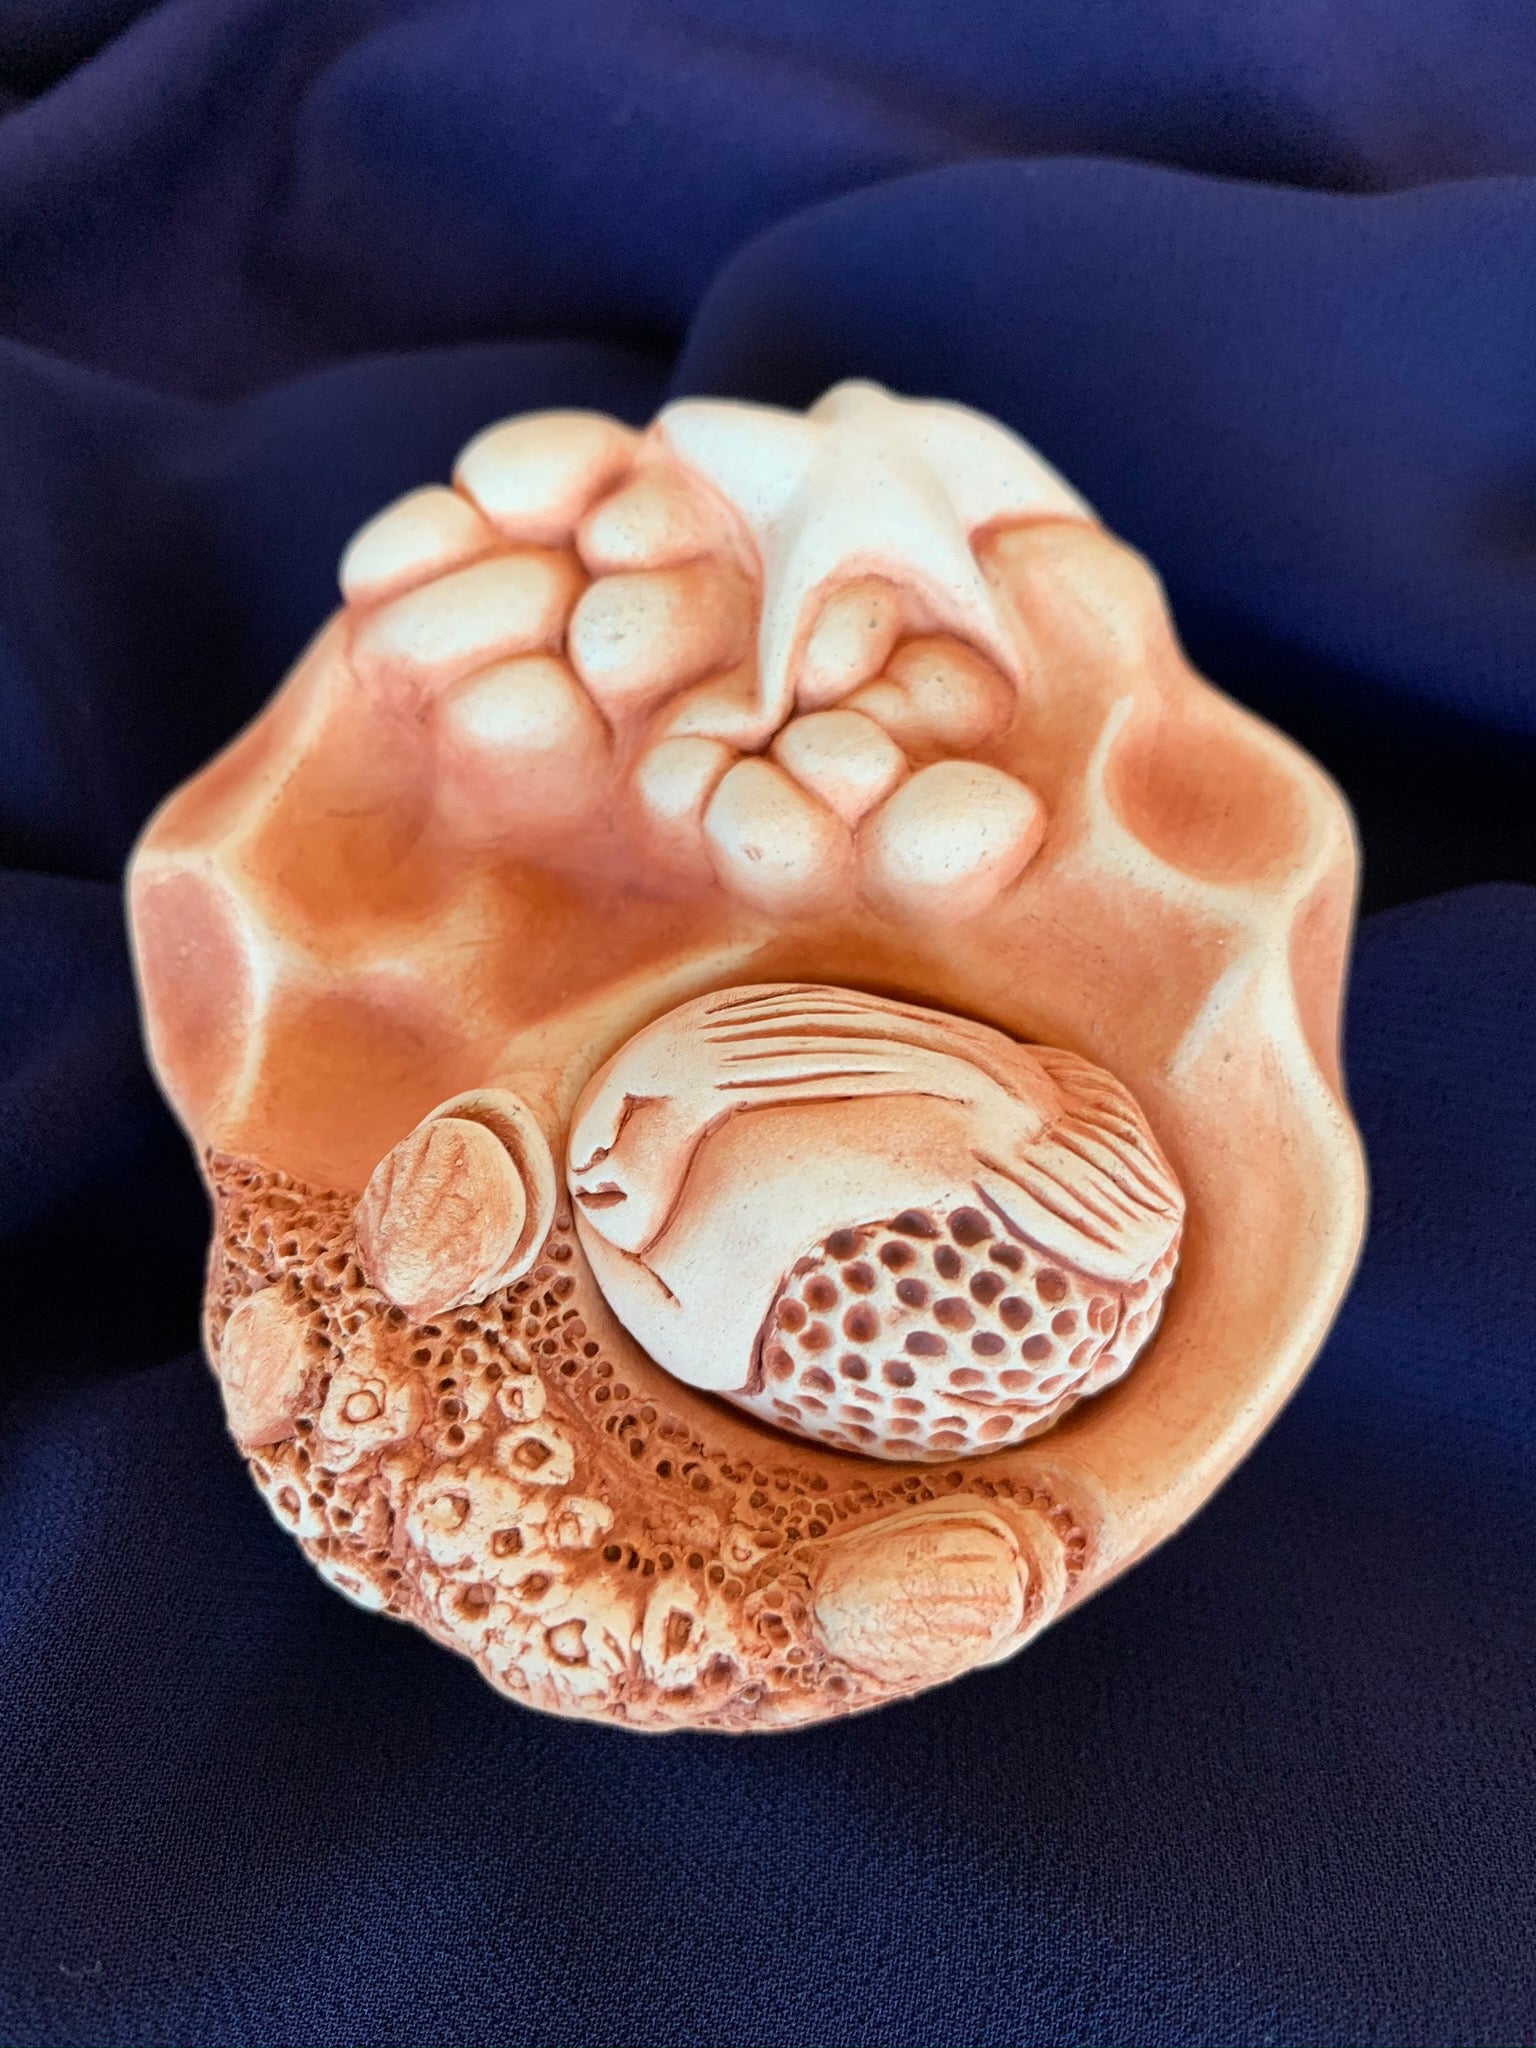 This lovely sacred art sculpture with removable mermaid is entitled The Ocean's Gift.  Water is life to all of us and is sacred in its own right. The cotton at the bottom is for collecting drops of water from sacred sites or ceremonies. From the cotton it wicks up into the sculpture and holds the energy of the site or ceremony. Approximately 3" across. Clay impressions for this sculpture were taken from barnacles and shells living on a fourteen million year old lava flow in Oregon.